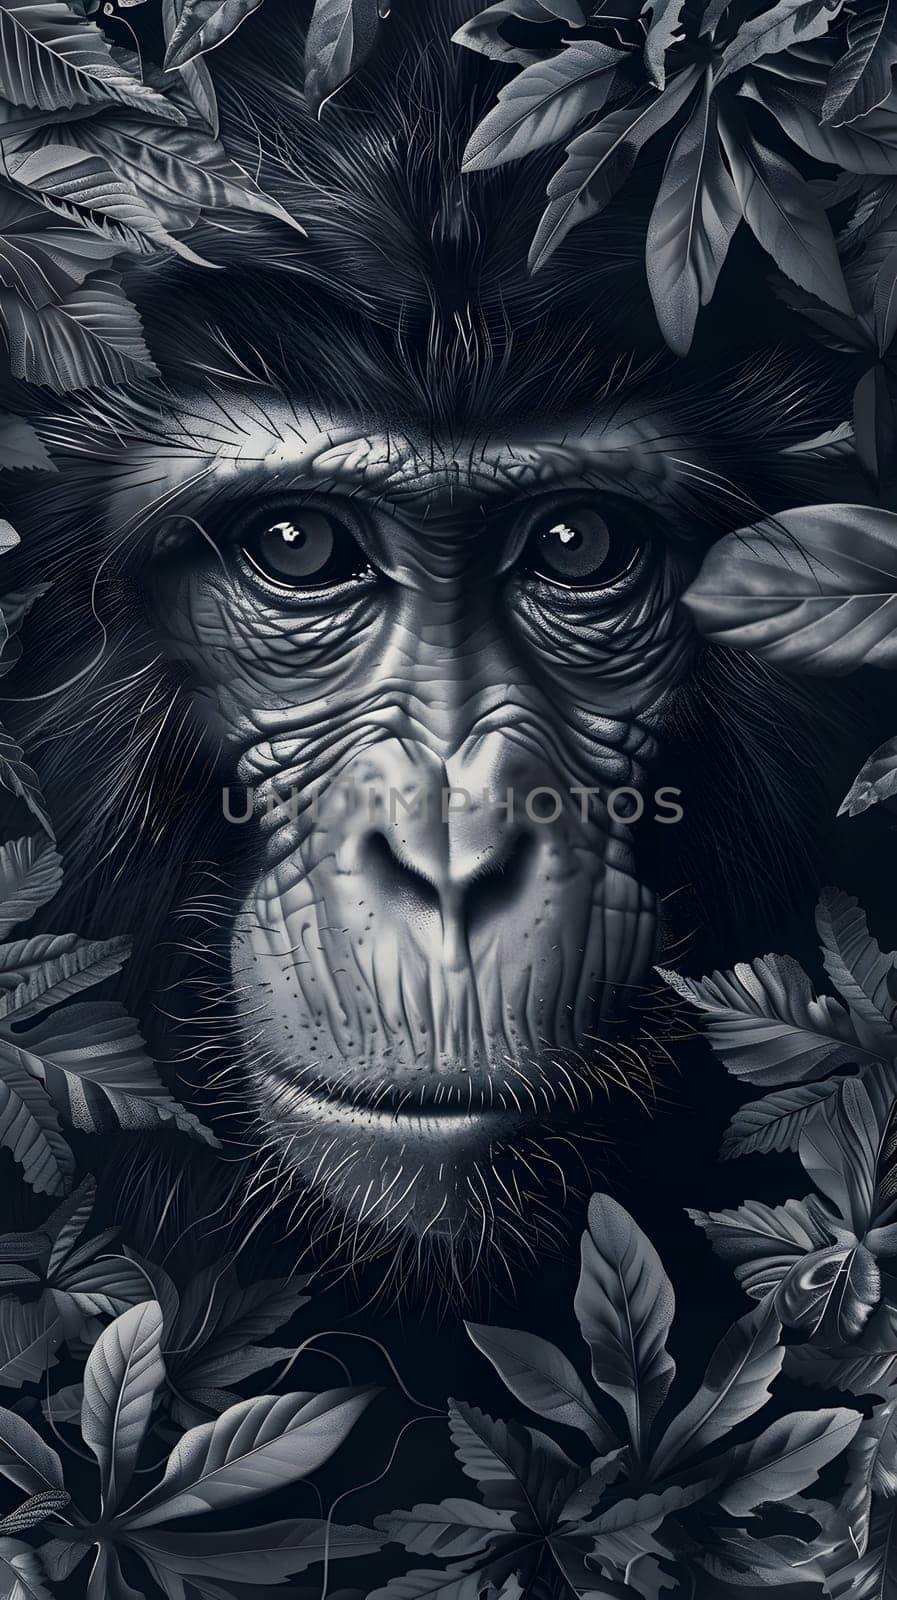 A monochrome closeup painting of a primate with a wrinkled snout, surrounded by leaves in darkness, showcasing the beauty of wildlife in monochrome photography